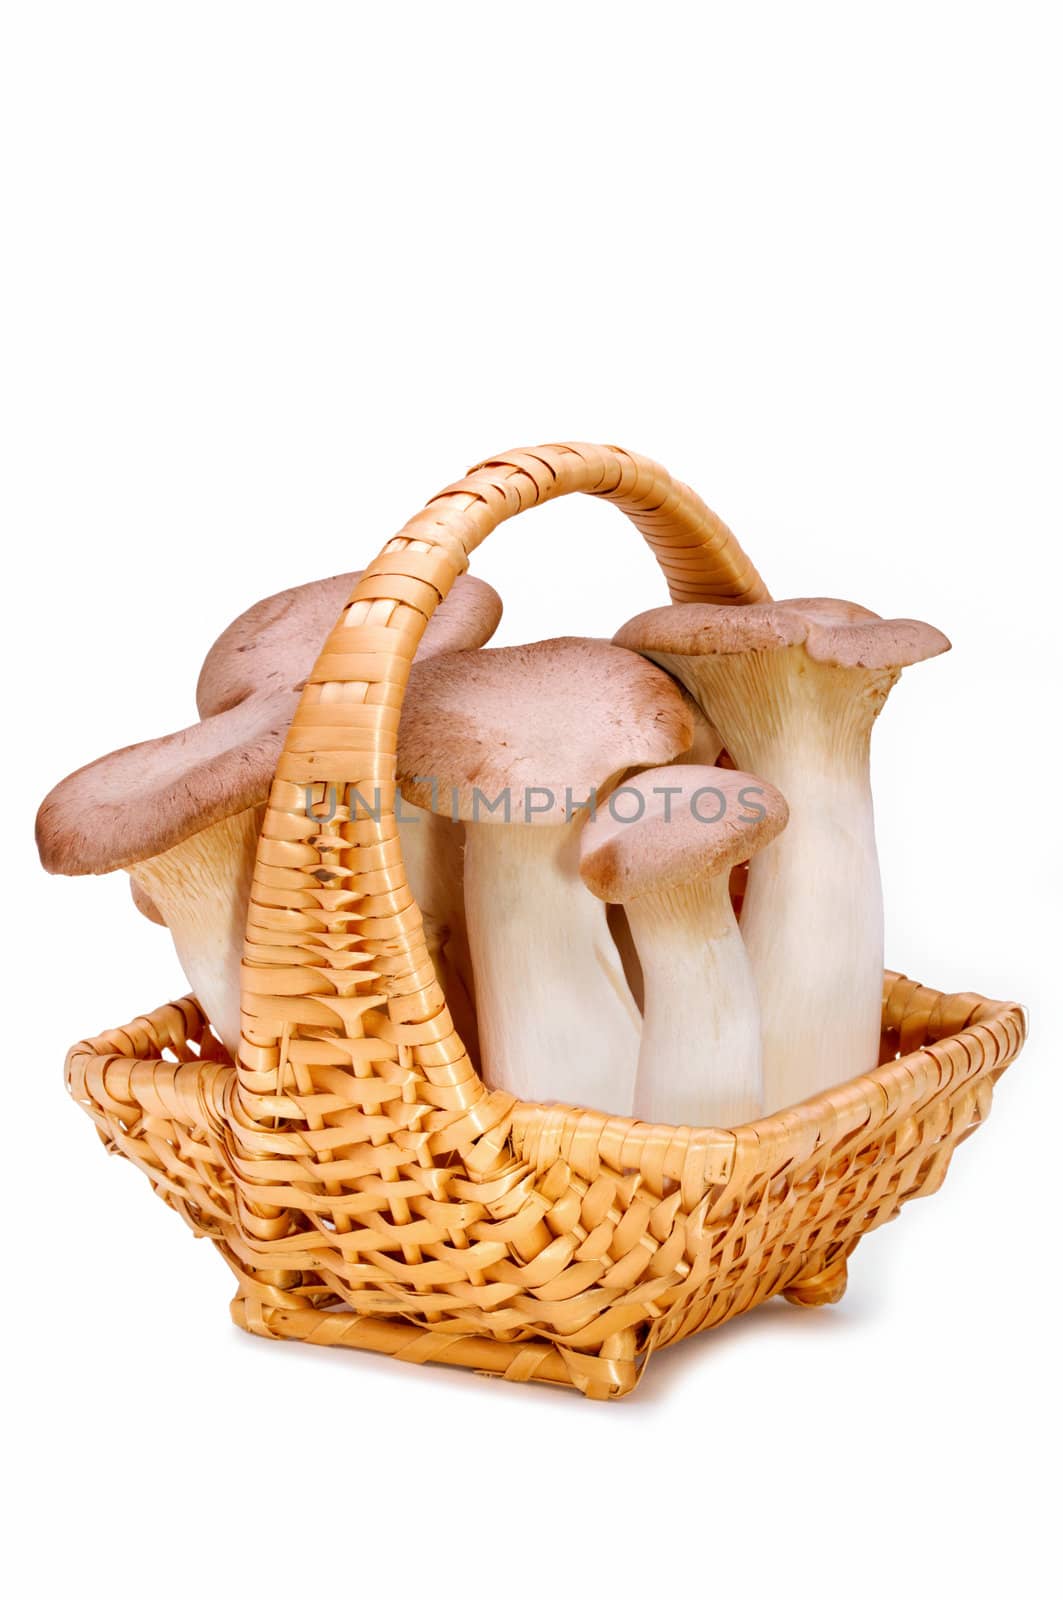 King trumpet. Fresh mushrooms in a basket on a white background.